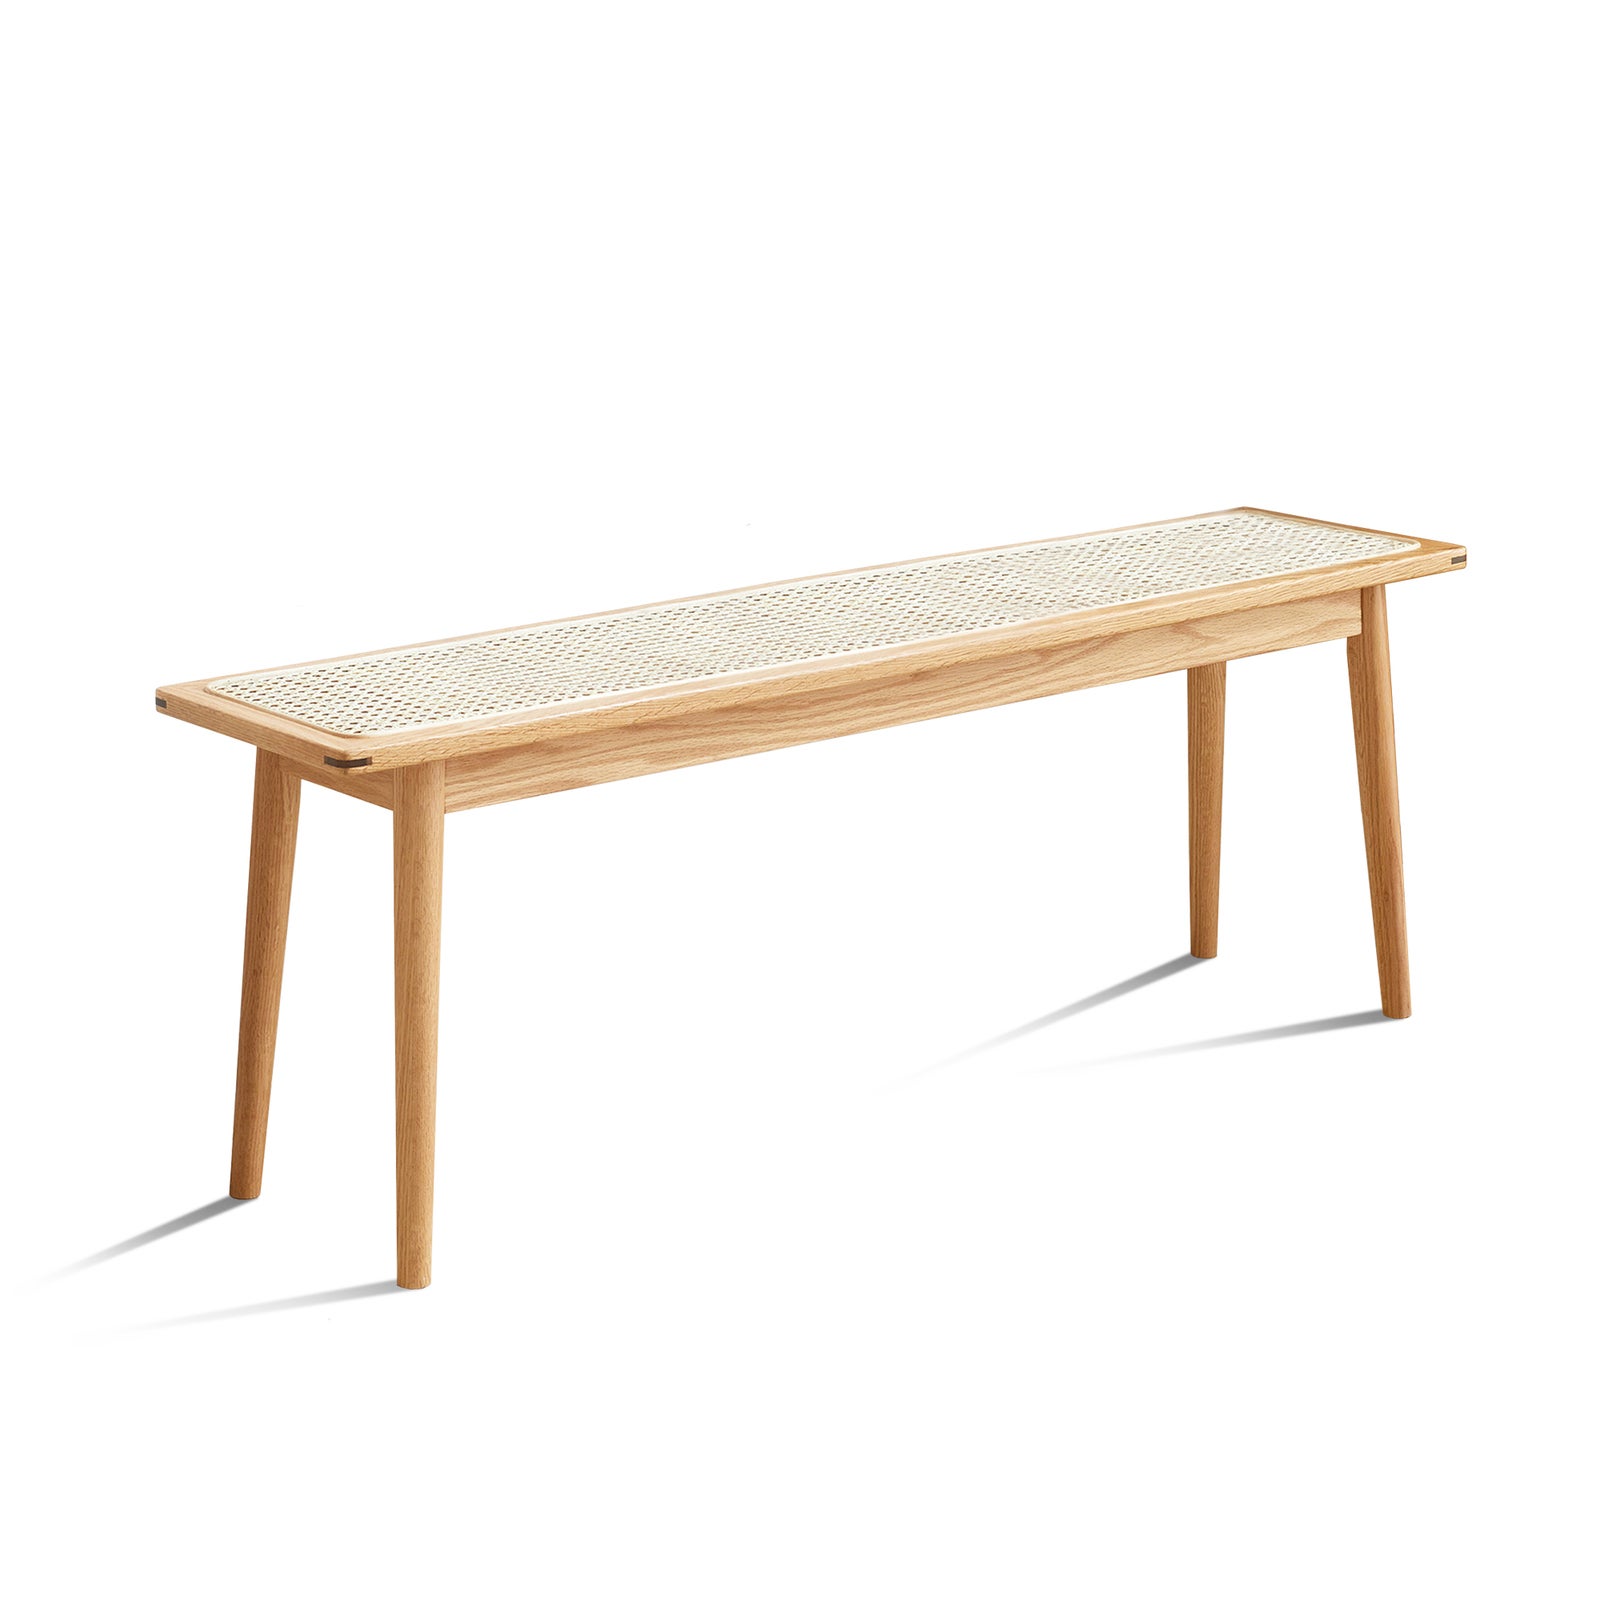 MIUZ Dining Bench Solid Timber American White Oak Wood Kitchen Entryway Bedroom